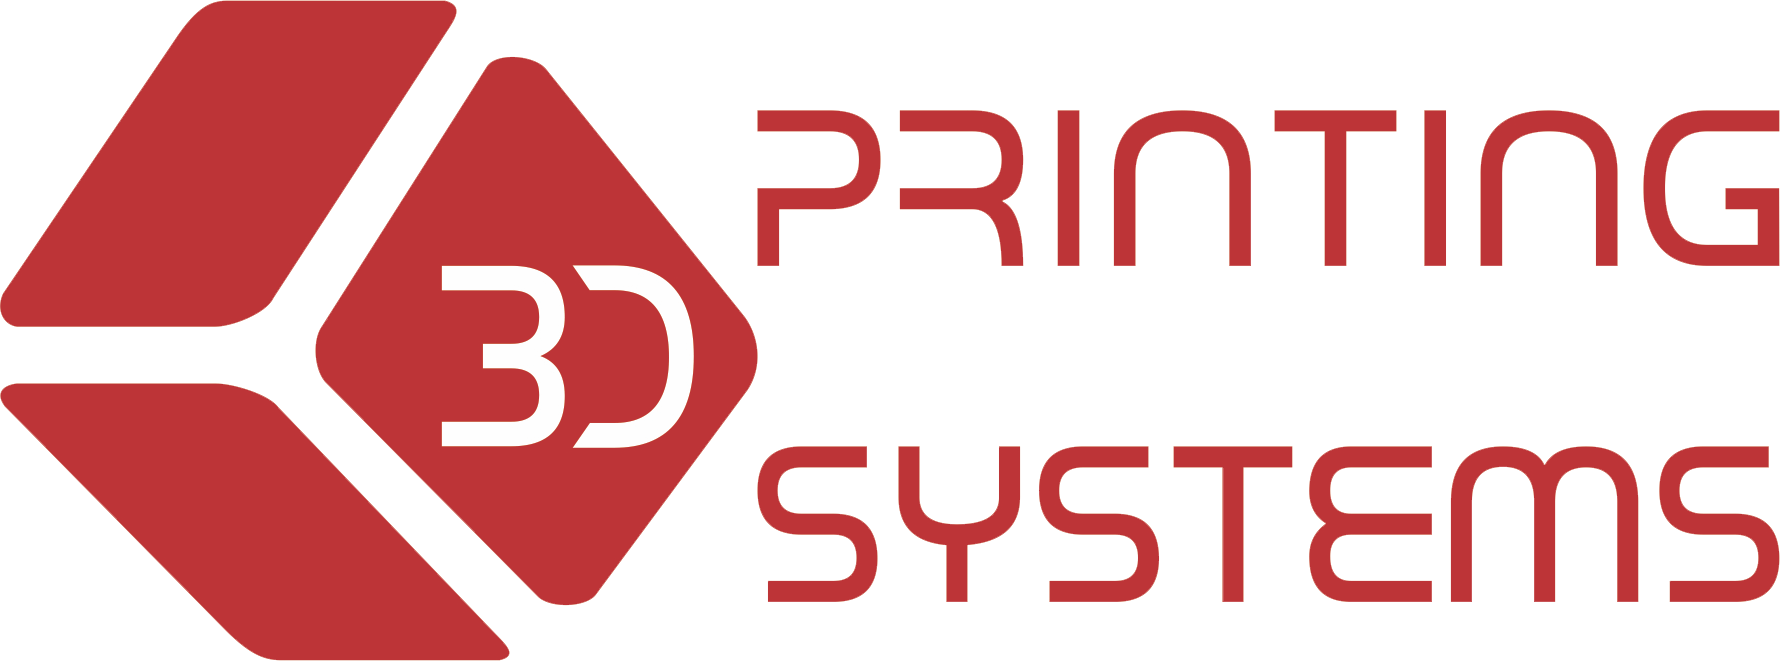 Best Printing Logo - 3D Printing Systems. DeskD Printers and more